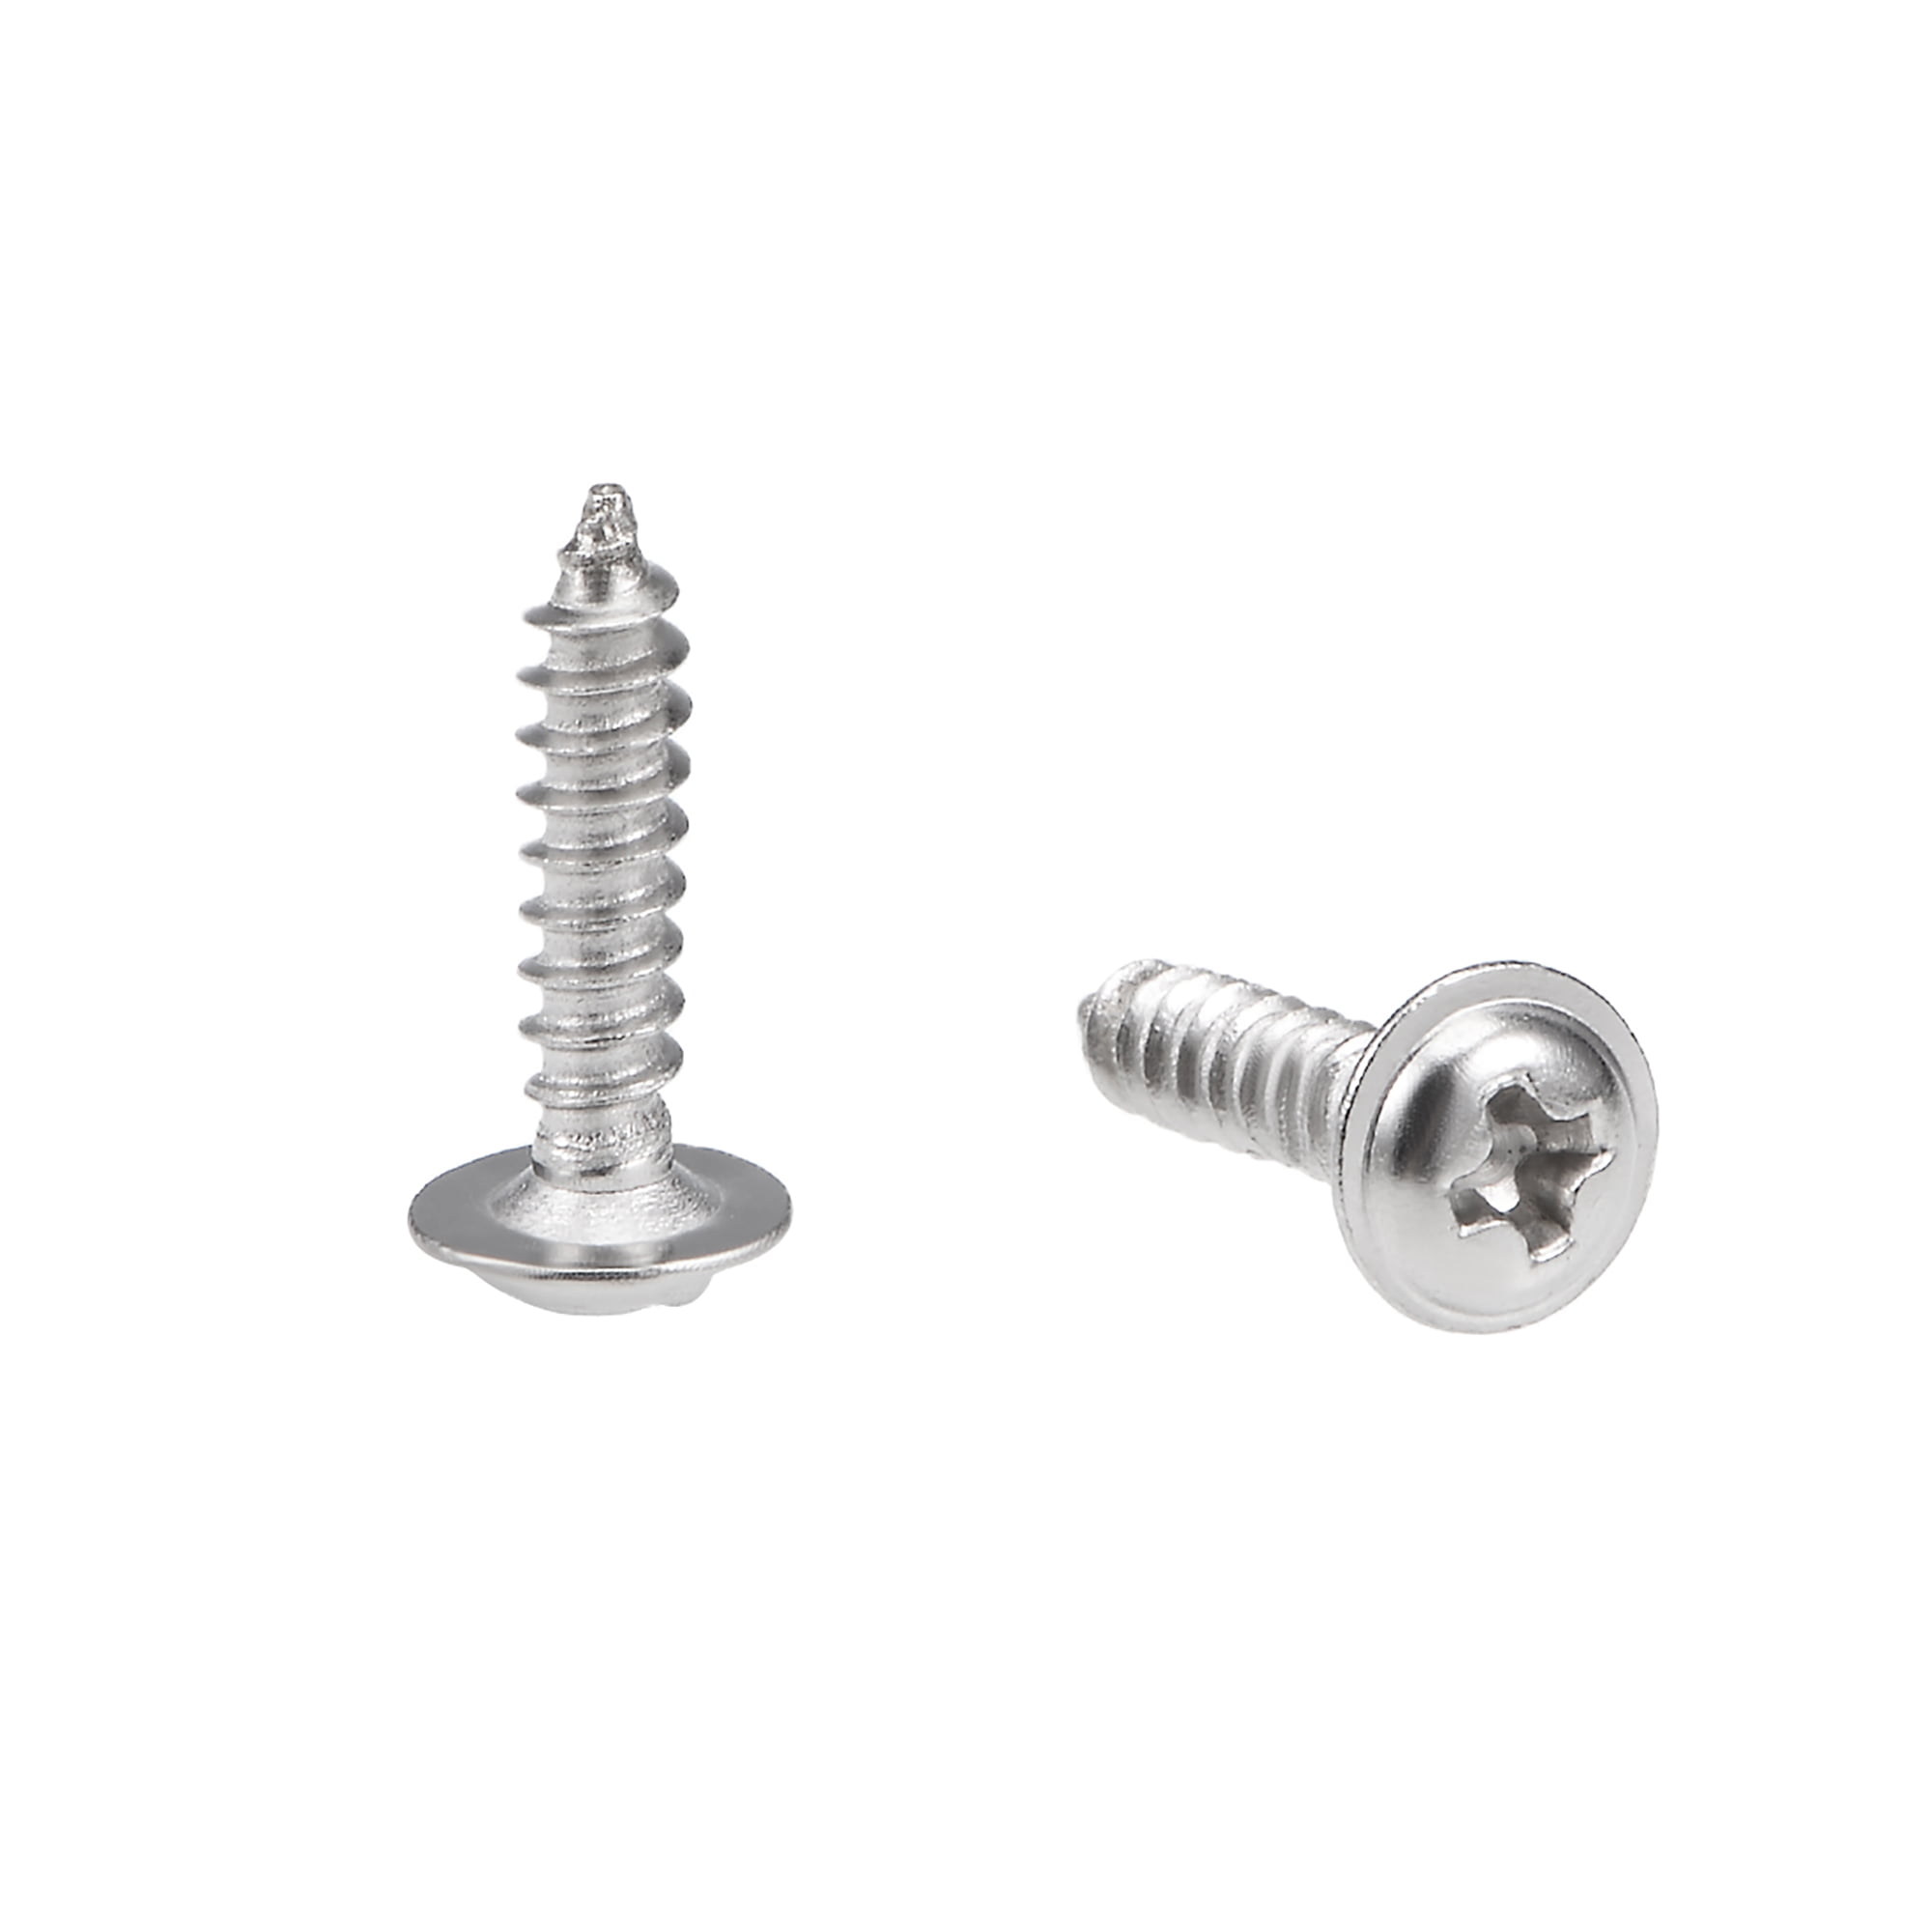 M2 stainless steel screws 5MM length for Steam*NEW* 